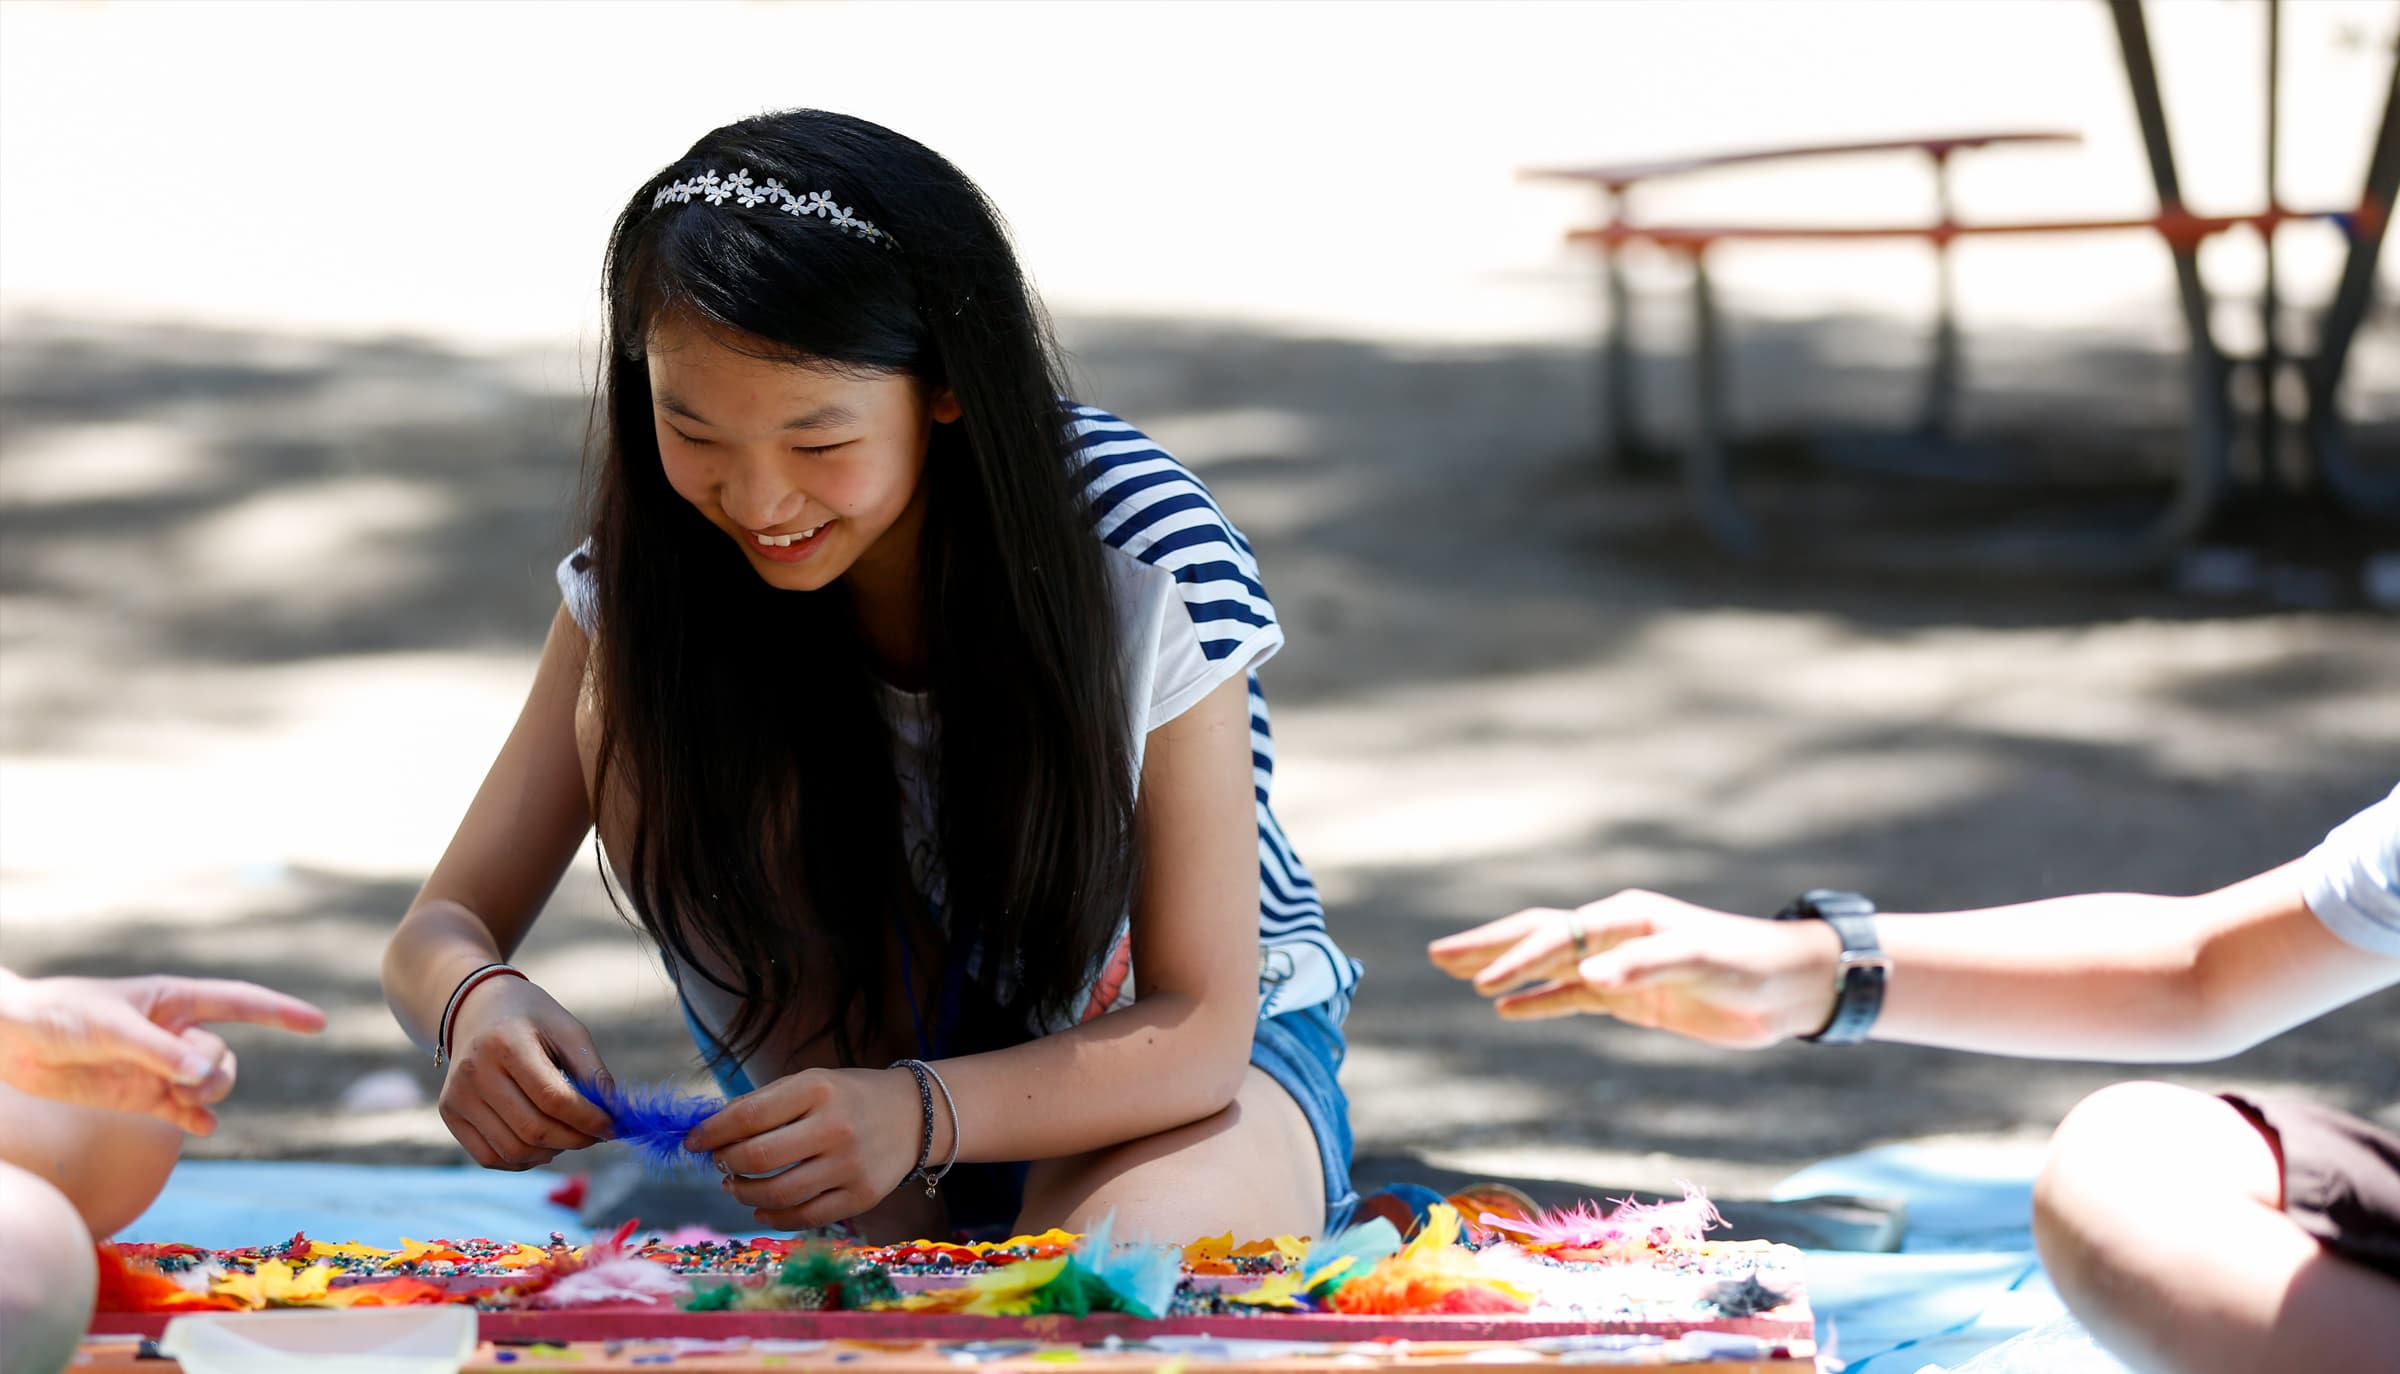 girl doing crafts on the ground outside with friends